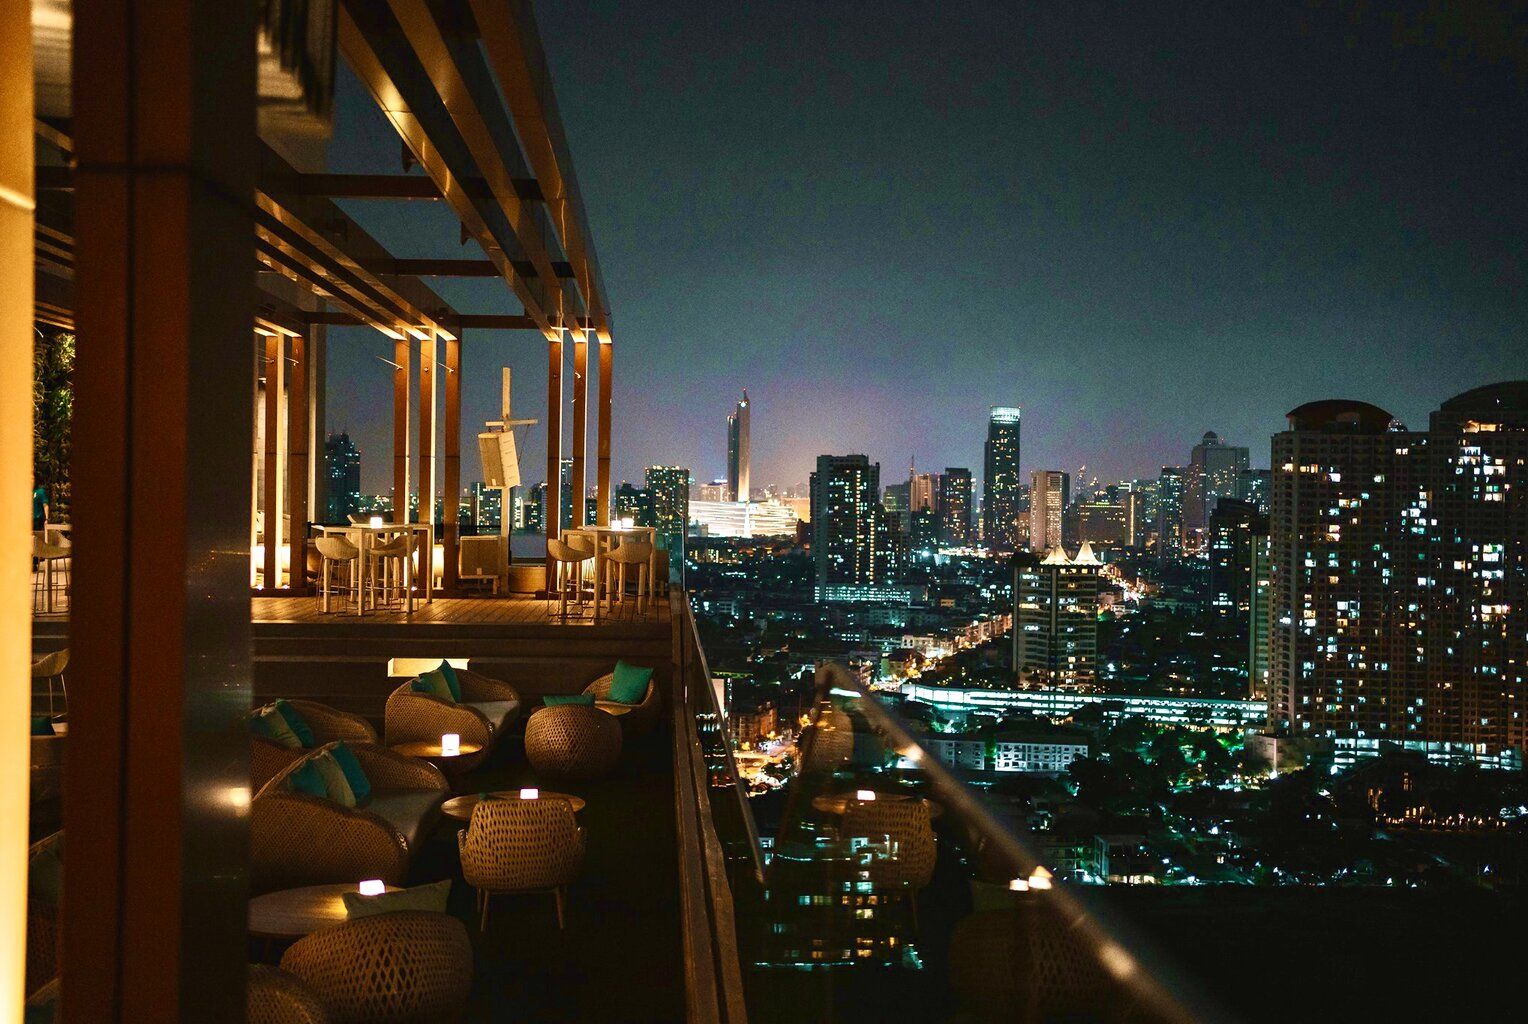 Guests can immerse themselves in the alluring ambiance on the breathtaking rooftop.